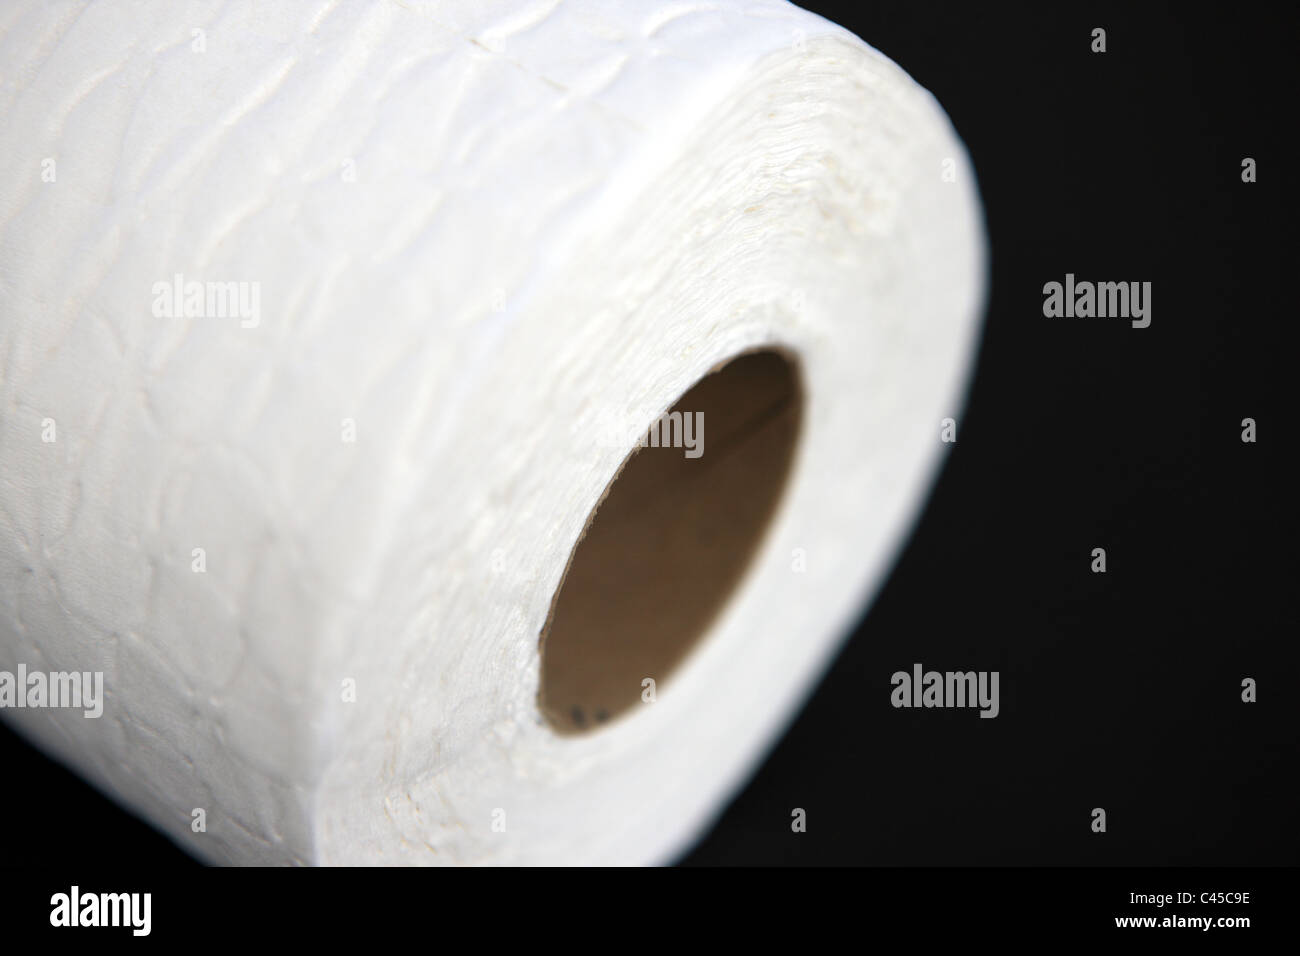 Toilet roll against a black background Stock Photo